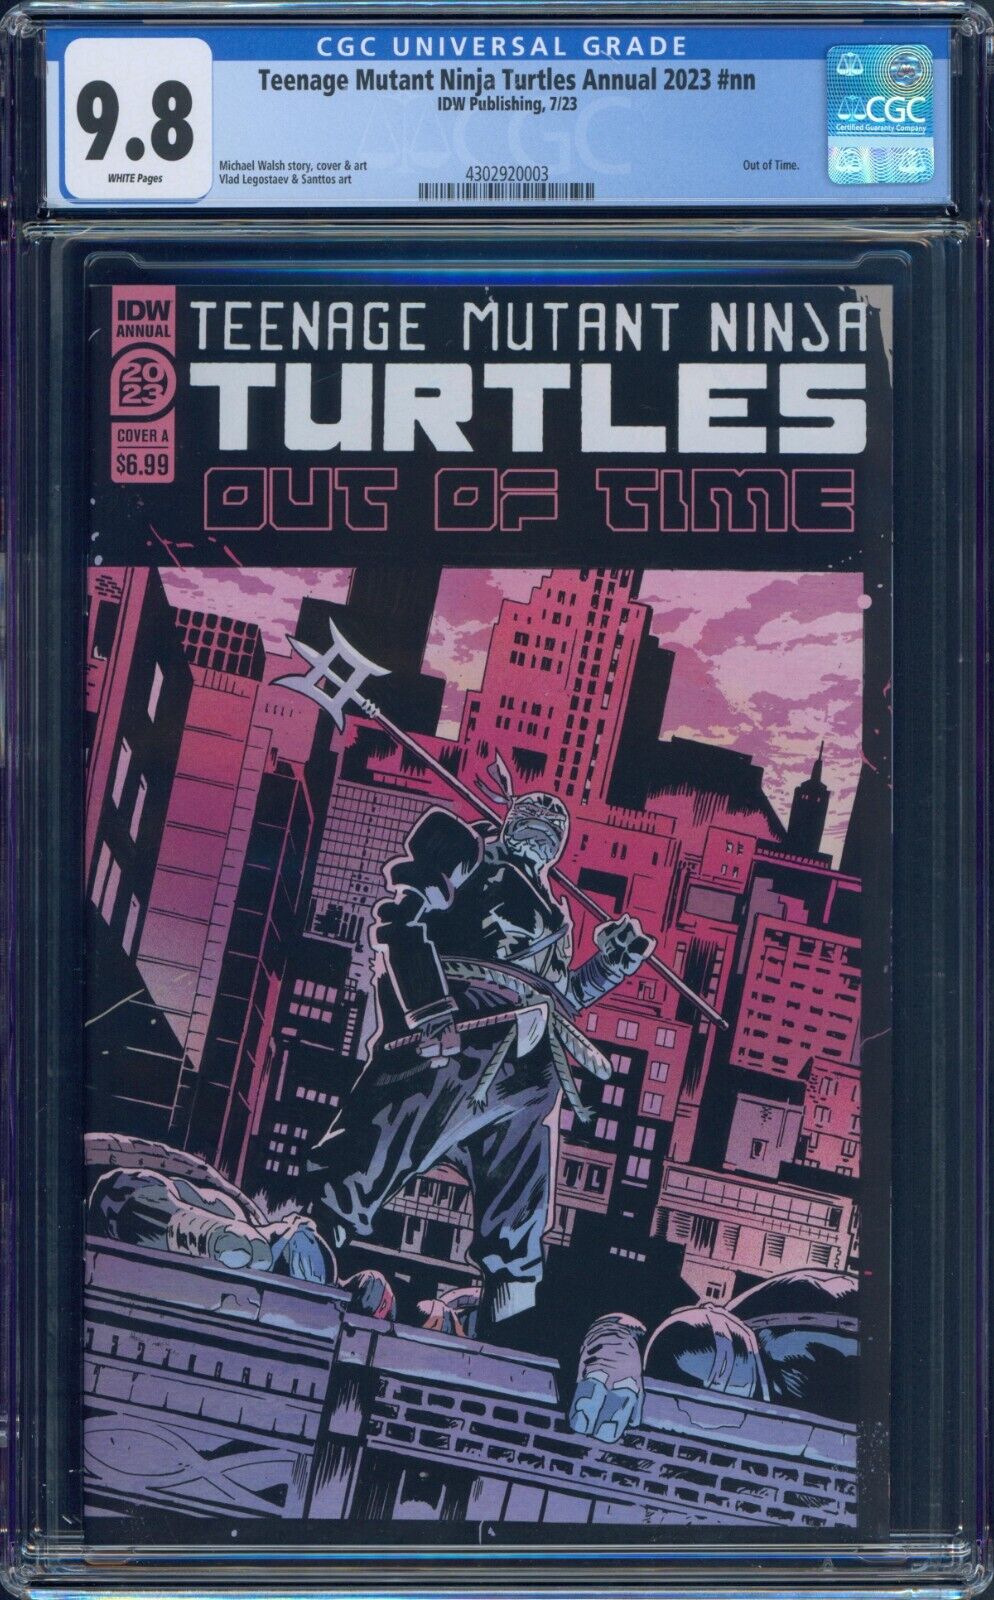 Teenage Mutant Ninja Turtles Annual 1 CGC 9.8 Out of Time Homage to OG IDW 2023